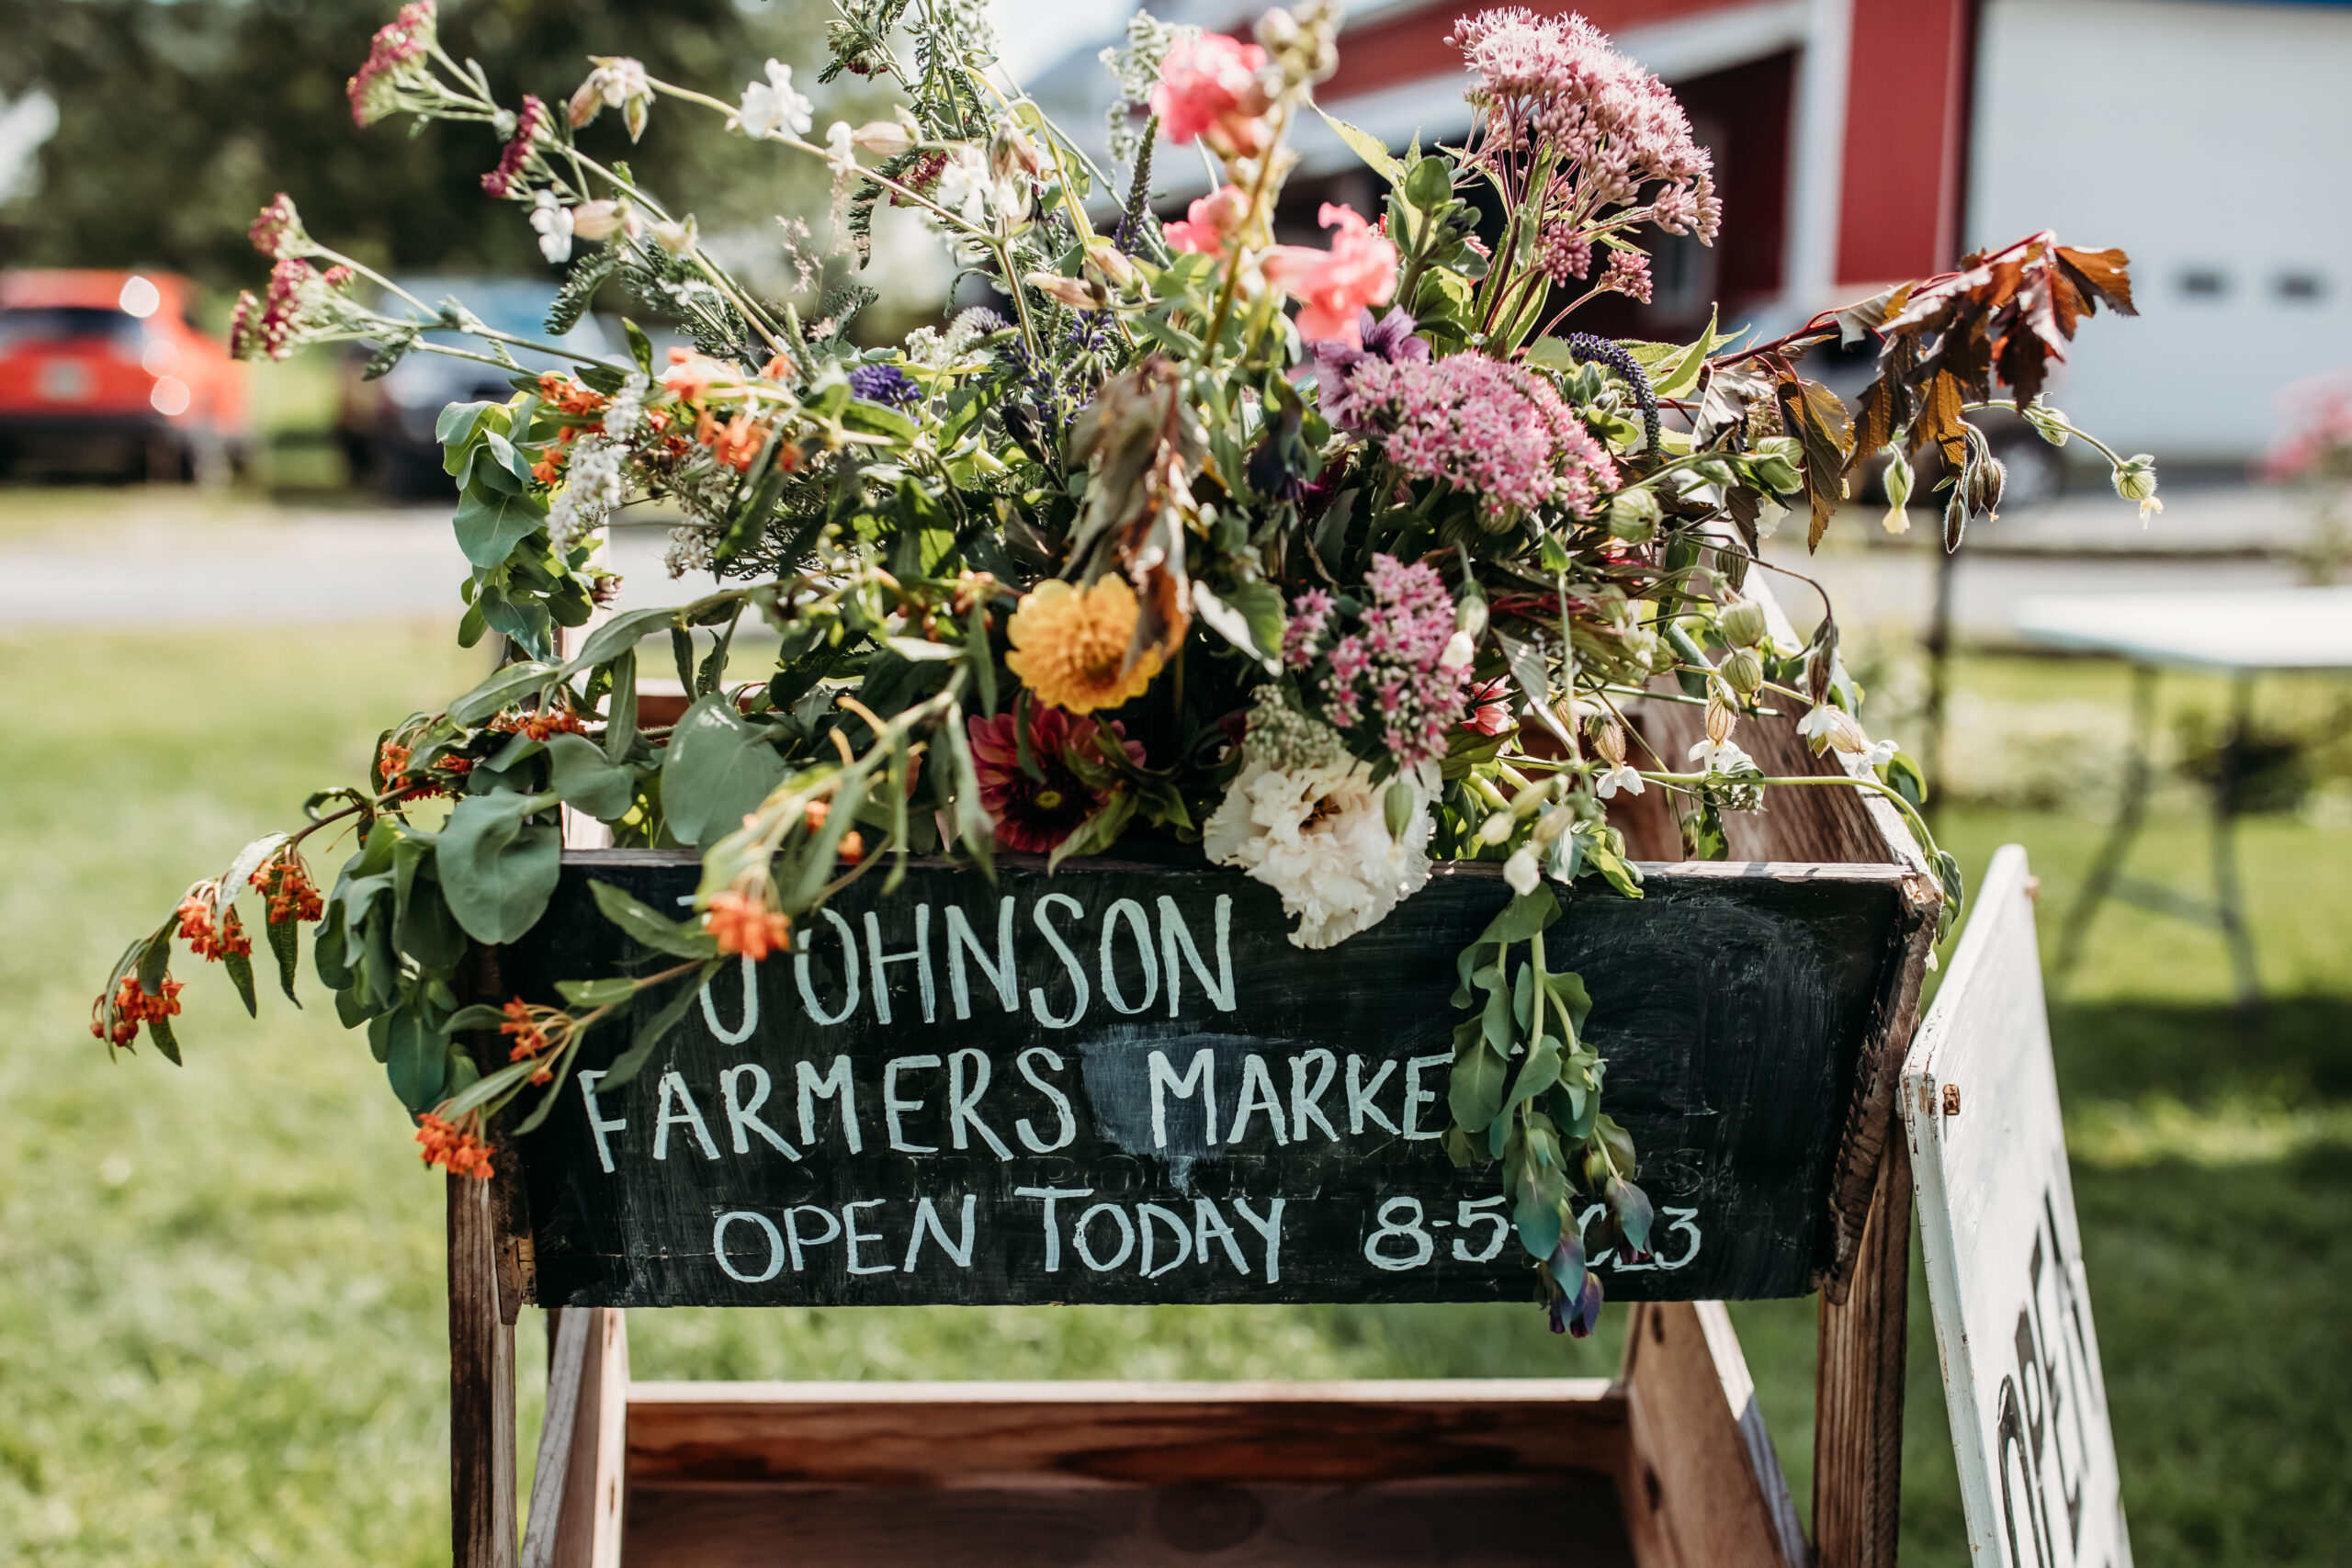 A wooden cart of flowers and chalkboard sign at Jess and Greg's farmers market themed wedding reception in Vermont